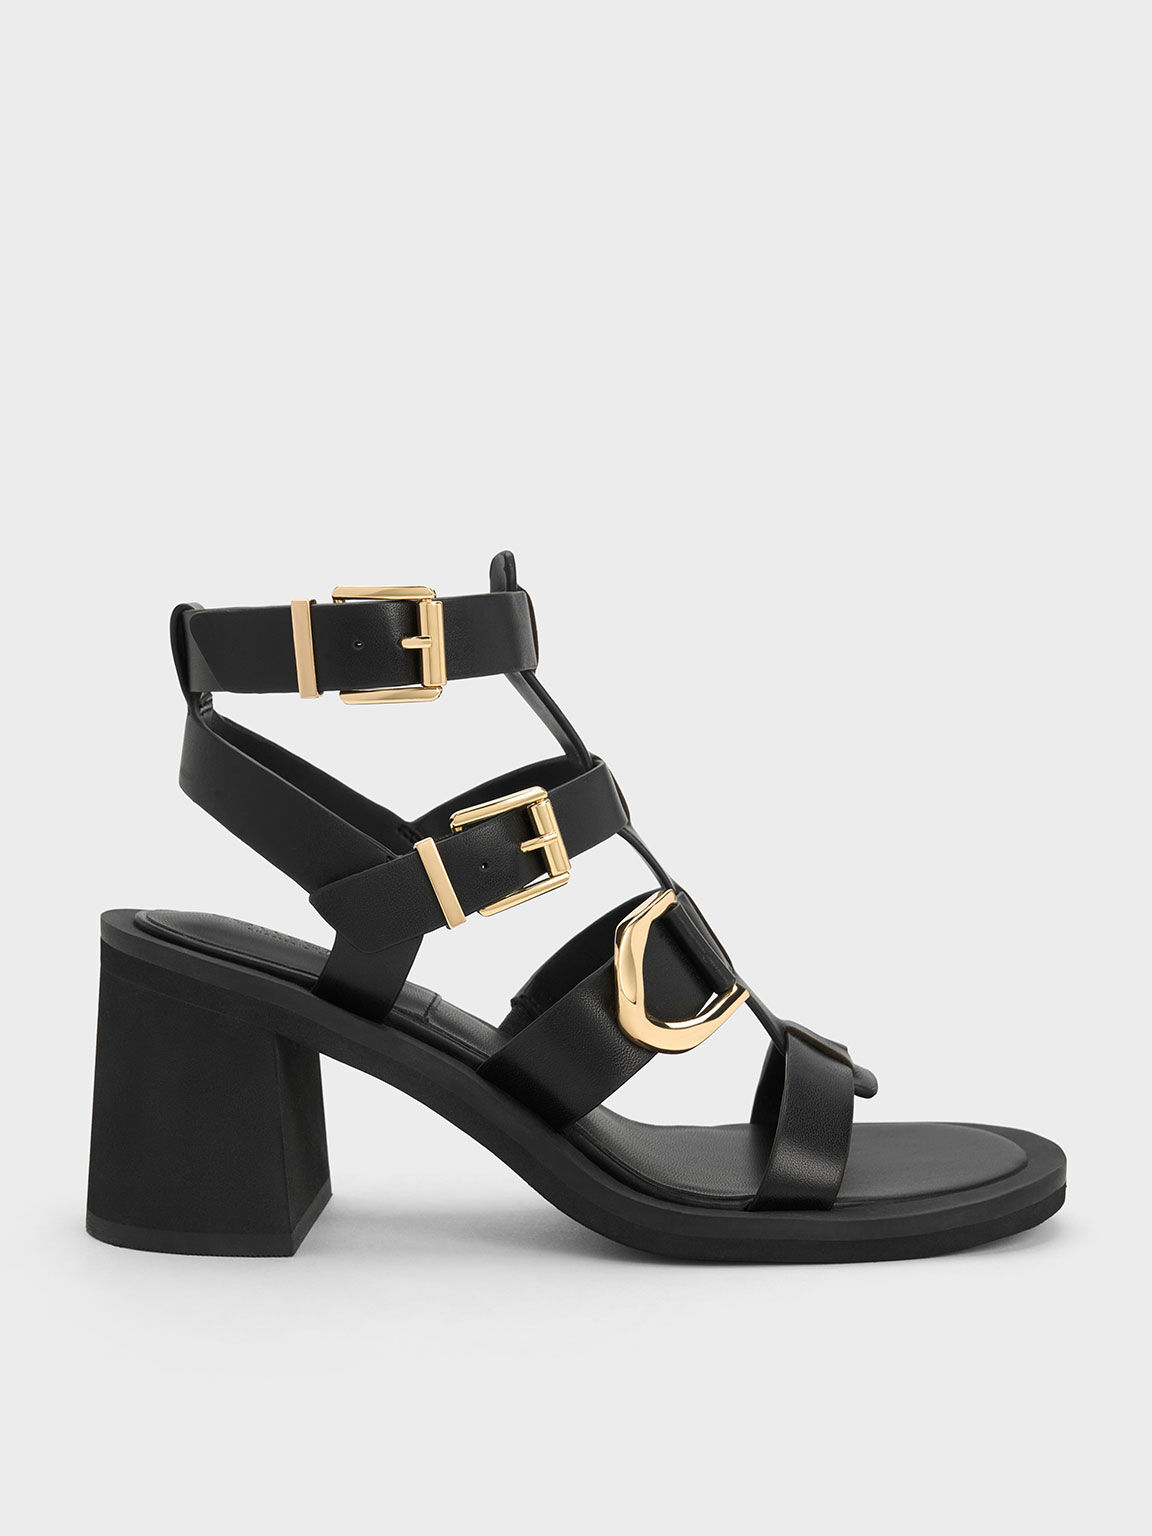 Best Gladiator Sandals To Invest In Now & Wear Every Summer | PORTER